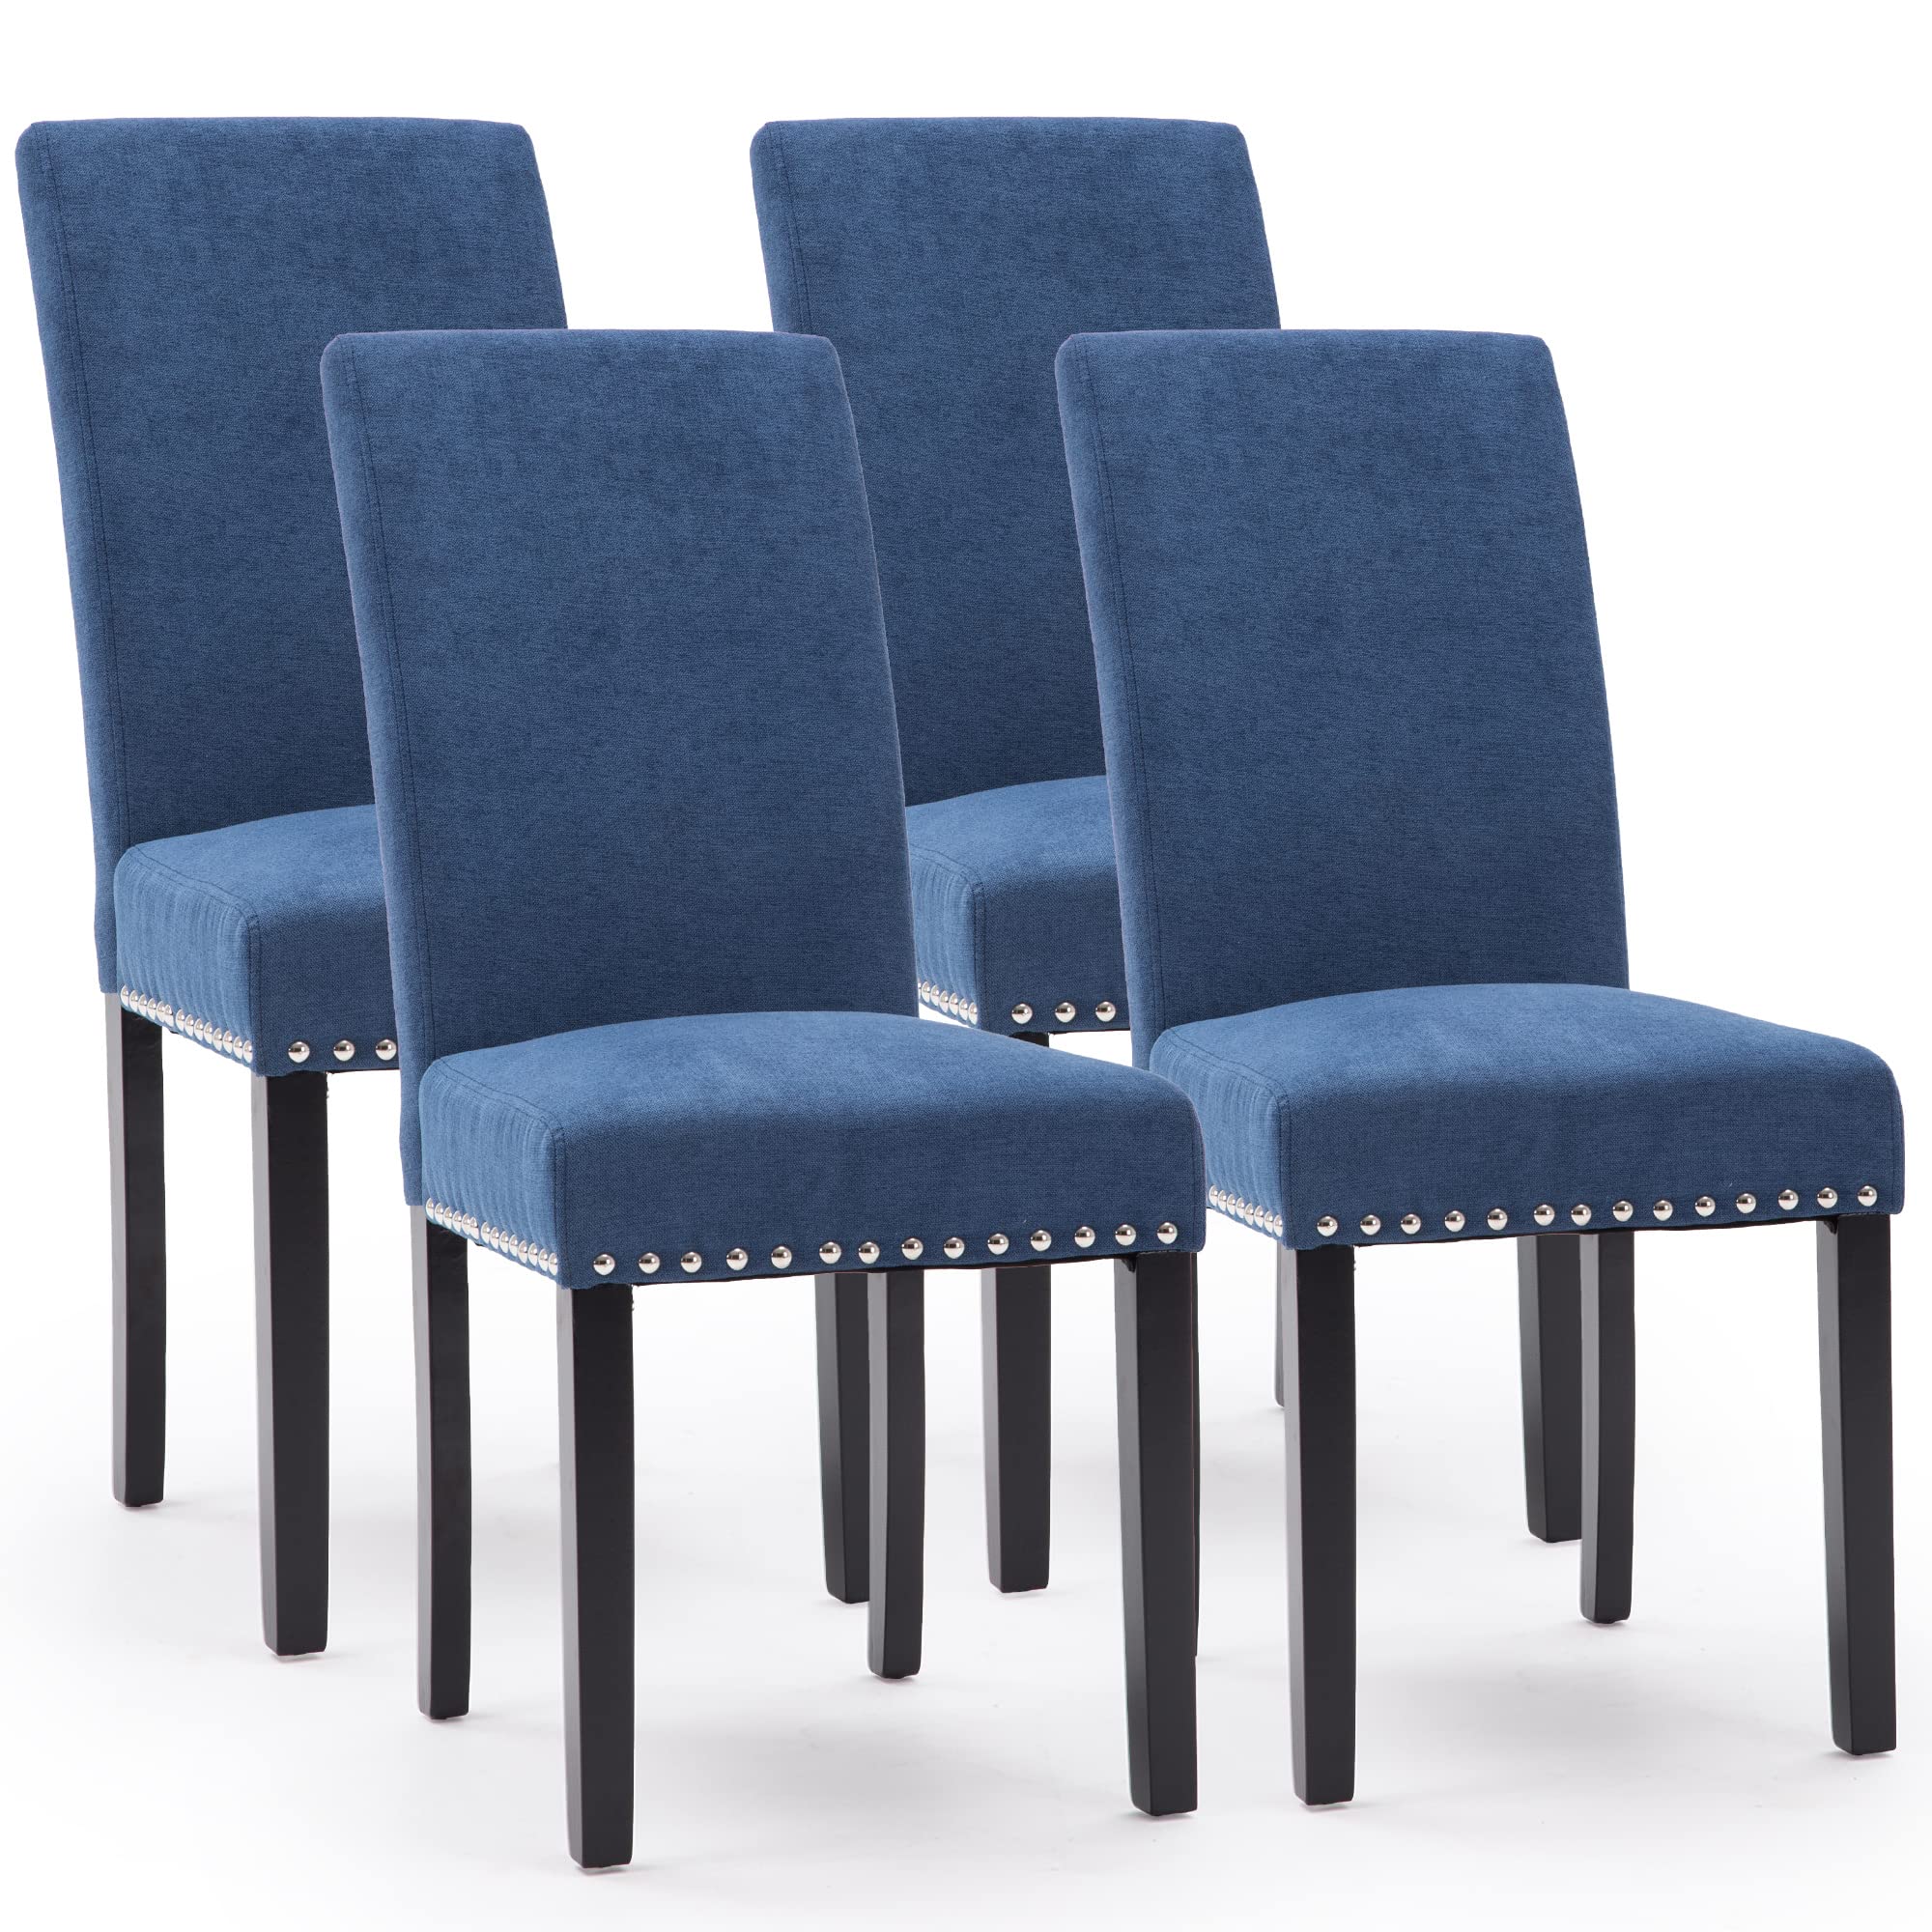 LSSPAID Dining Chairs, Fabric Padded Dining Room Chairs, Nail Head Trim Dining Chair, Blue, Set of 4